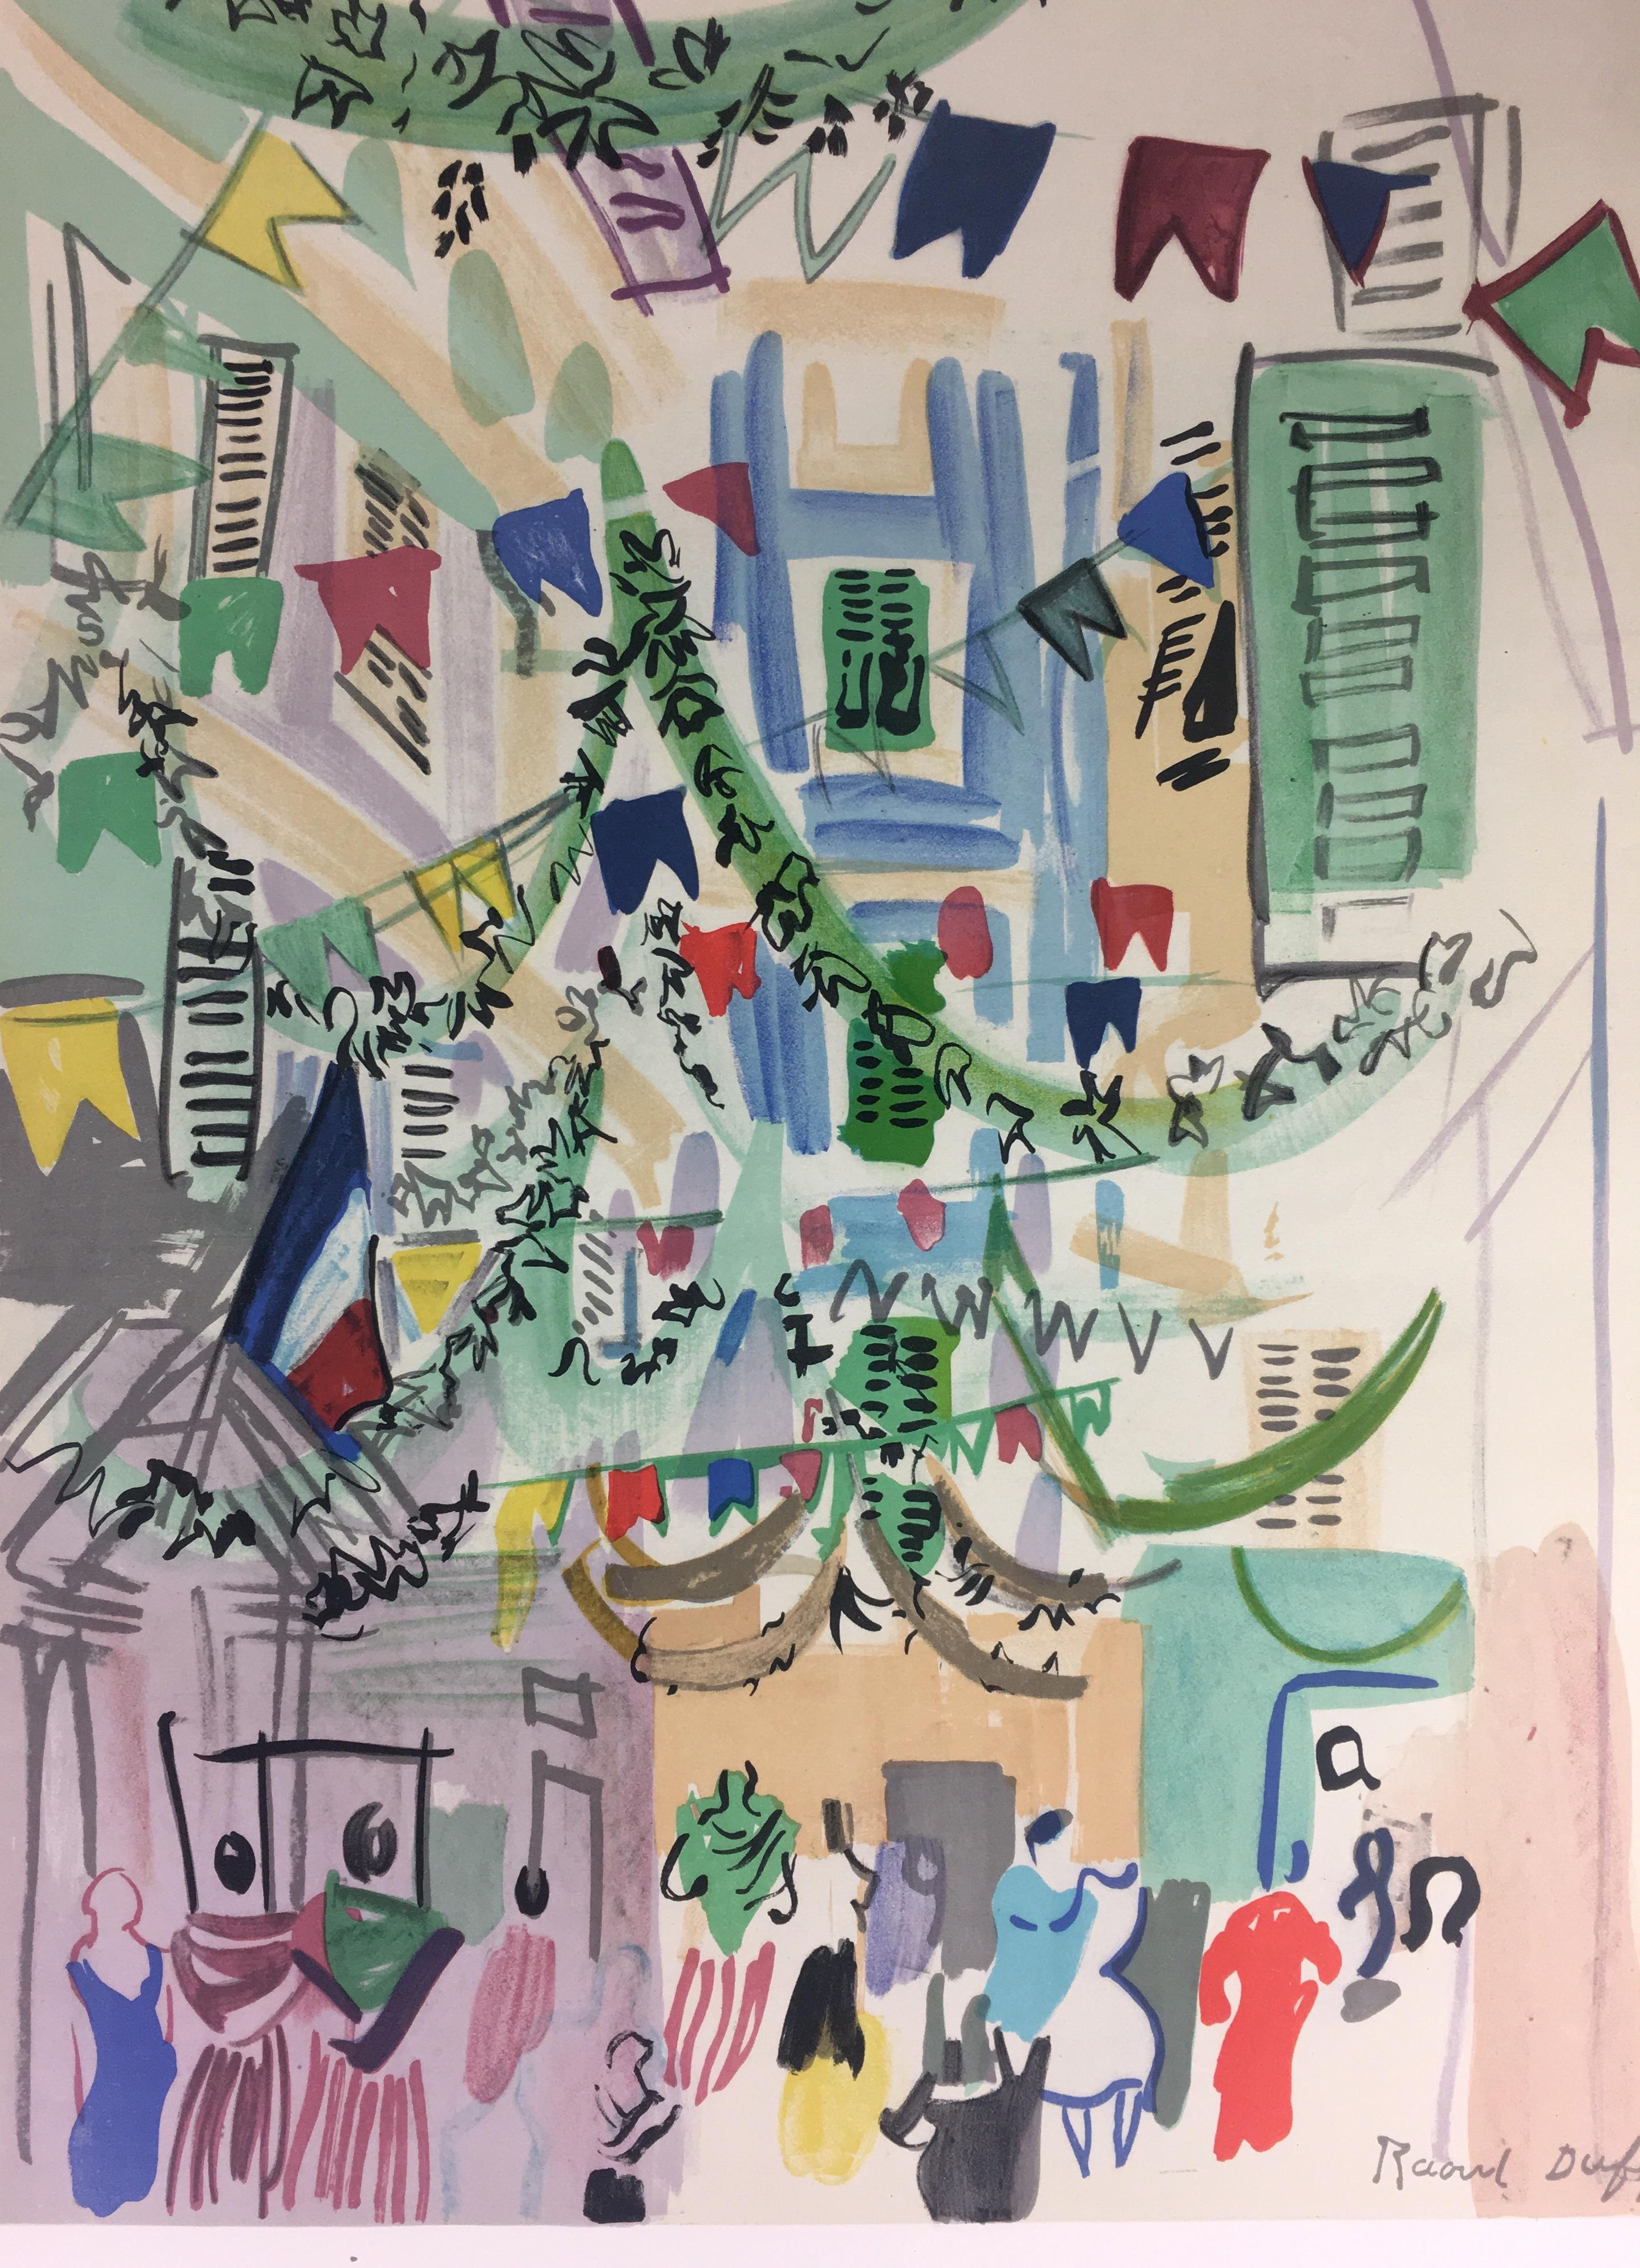 Original midcentury Raoul Dufy art poster from the 1950s printed by Mourlot, Paris. 

Raoul Dufy was a renowned artist that created excellent works of art in both contemporary and Mid-Century Modern styles. This is a vintage poster, not a reprint.